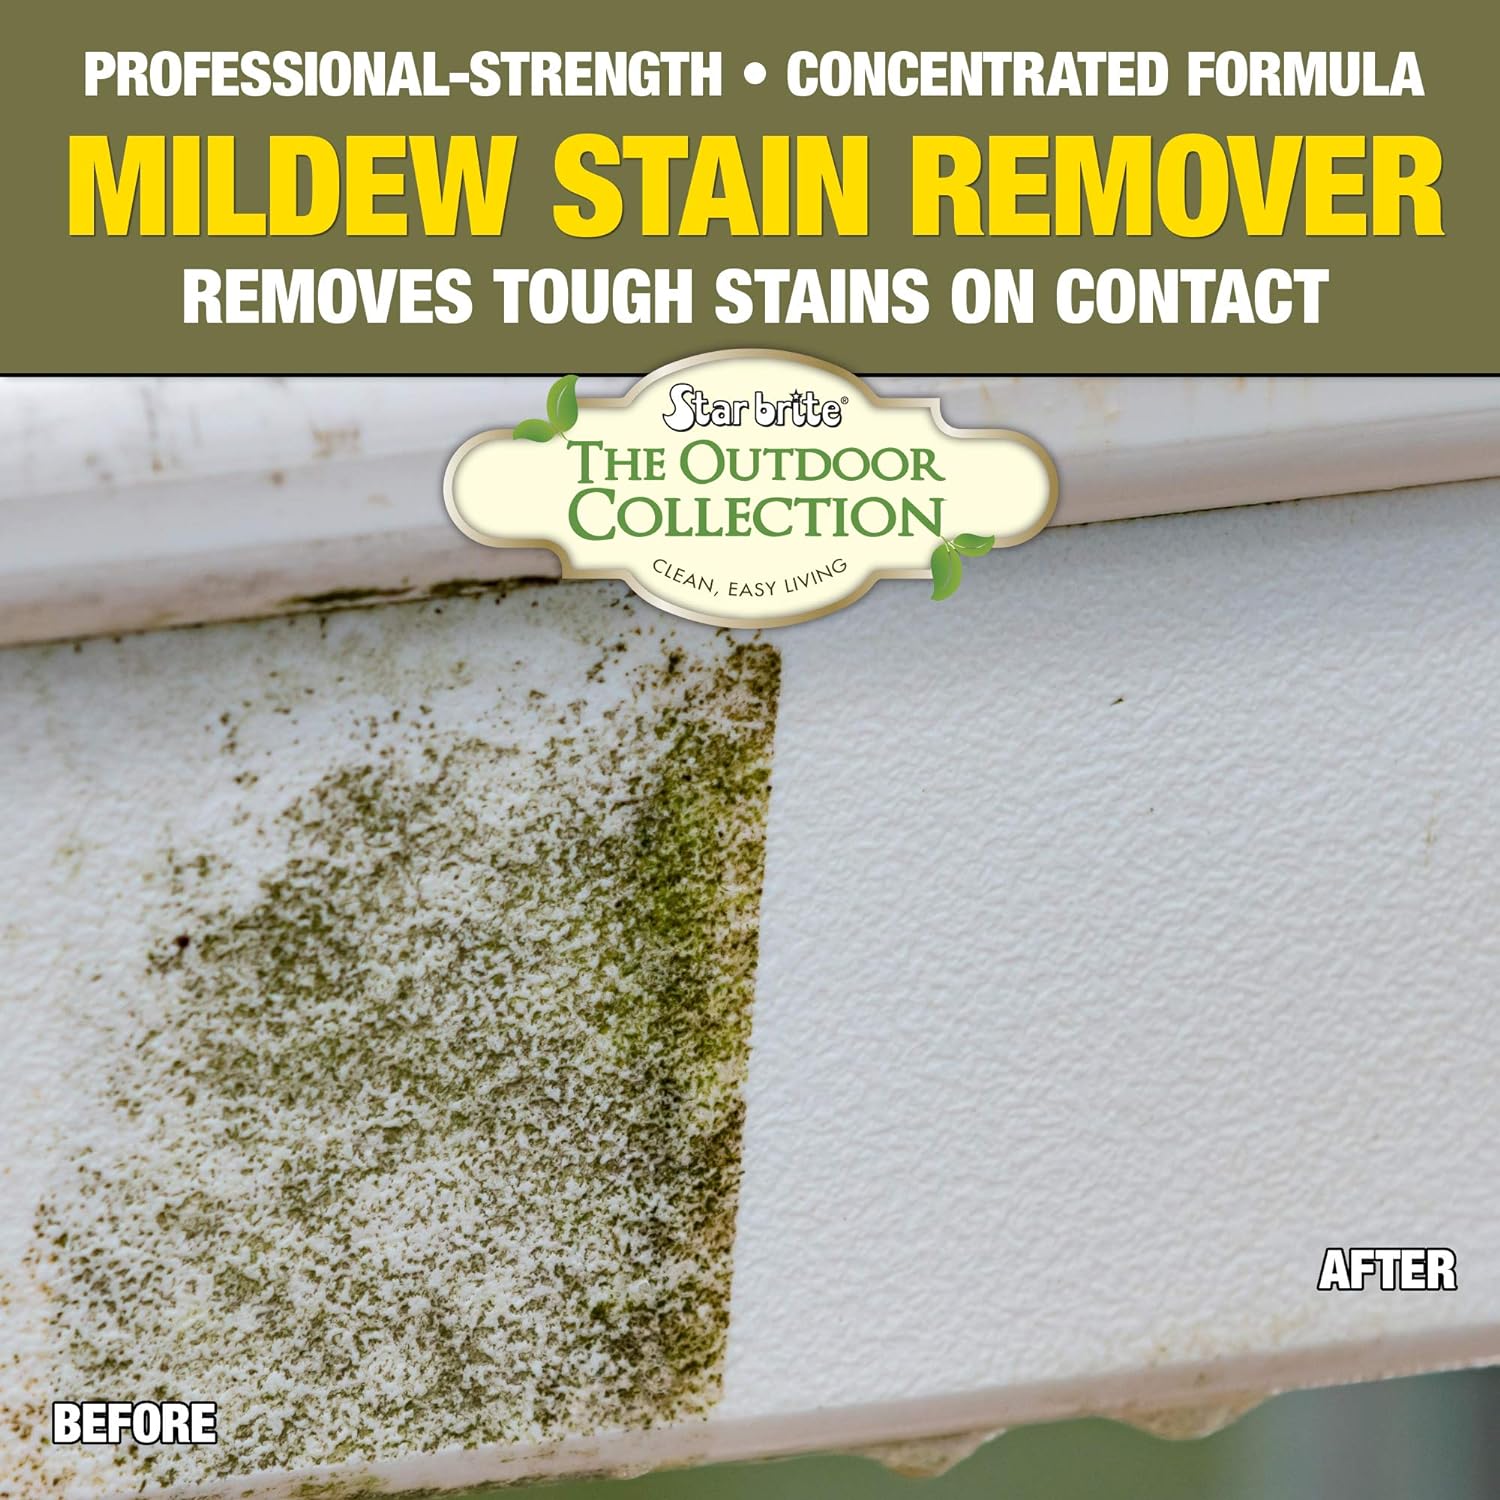 STAR BRITE The Outdoor Collection Mildew Stain Remover - 32 OZ (54432) : Health & Household